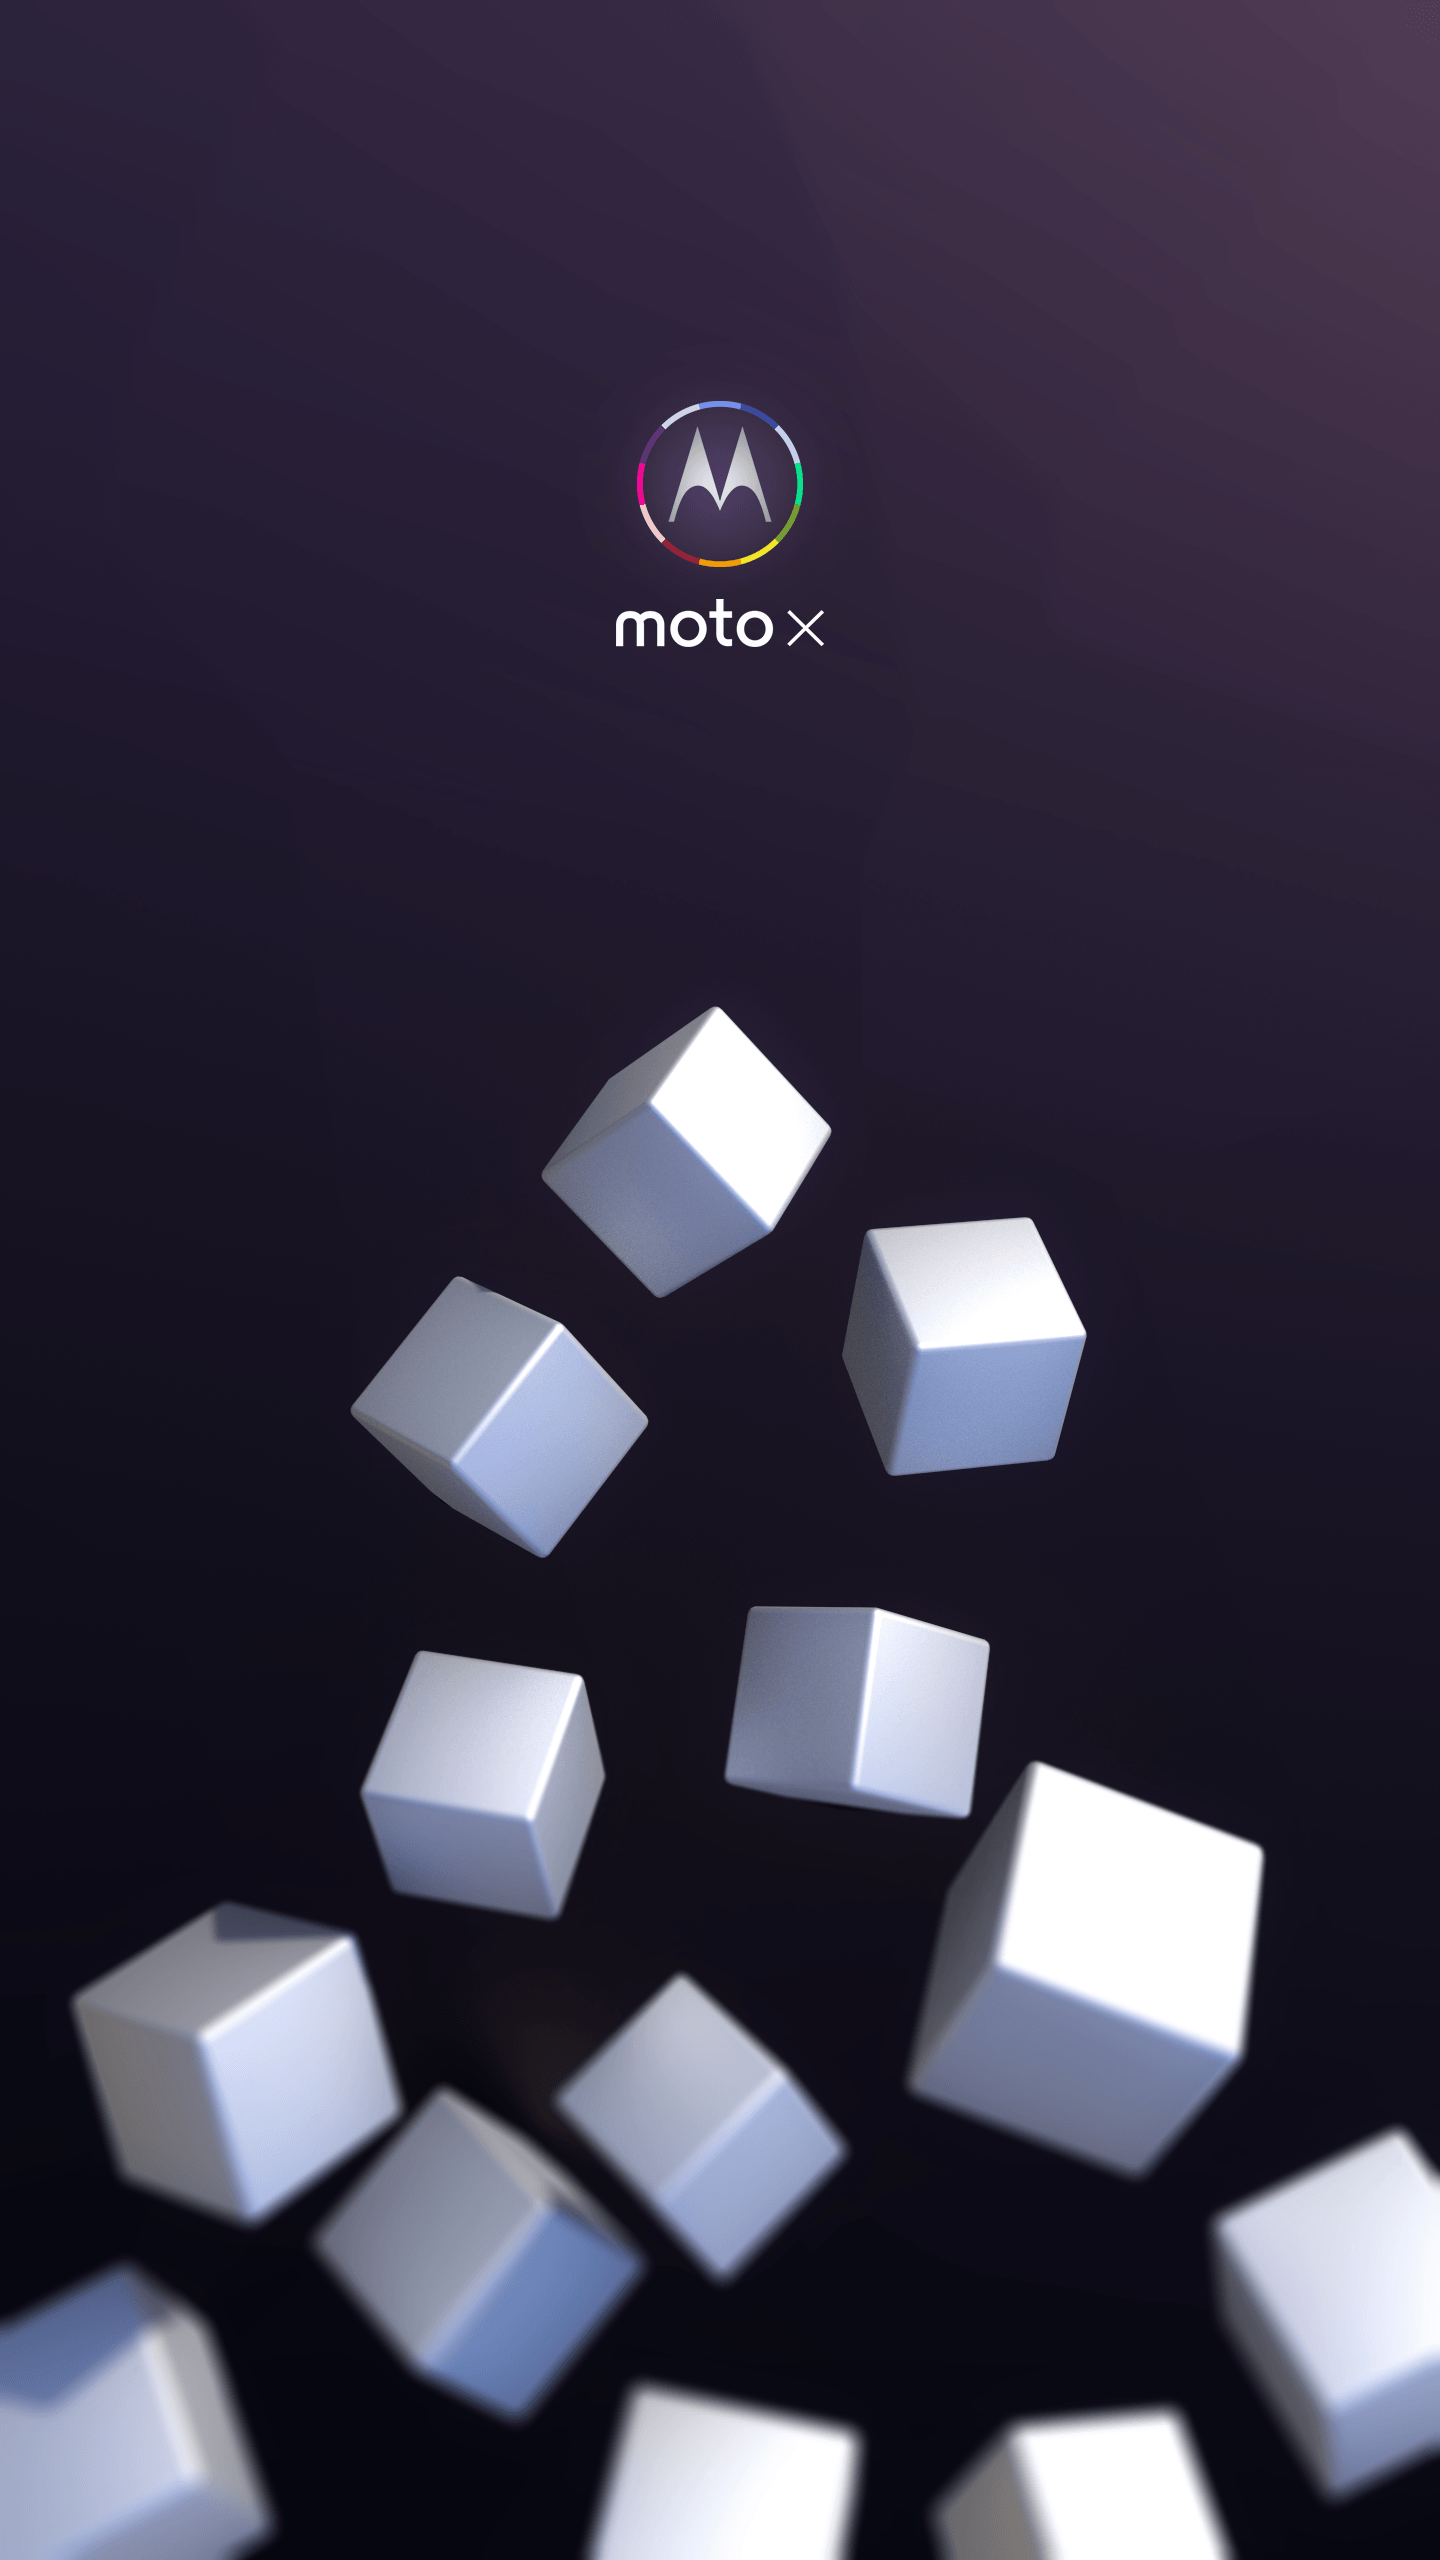 I made a wallpaper for the new Moto X once I get it, but you guys